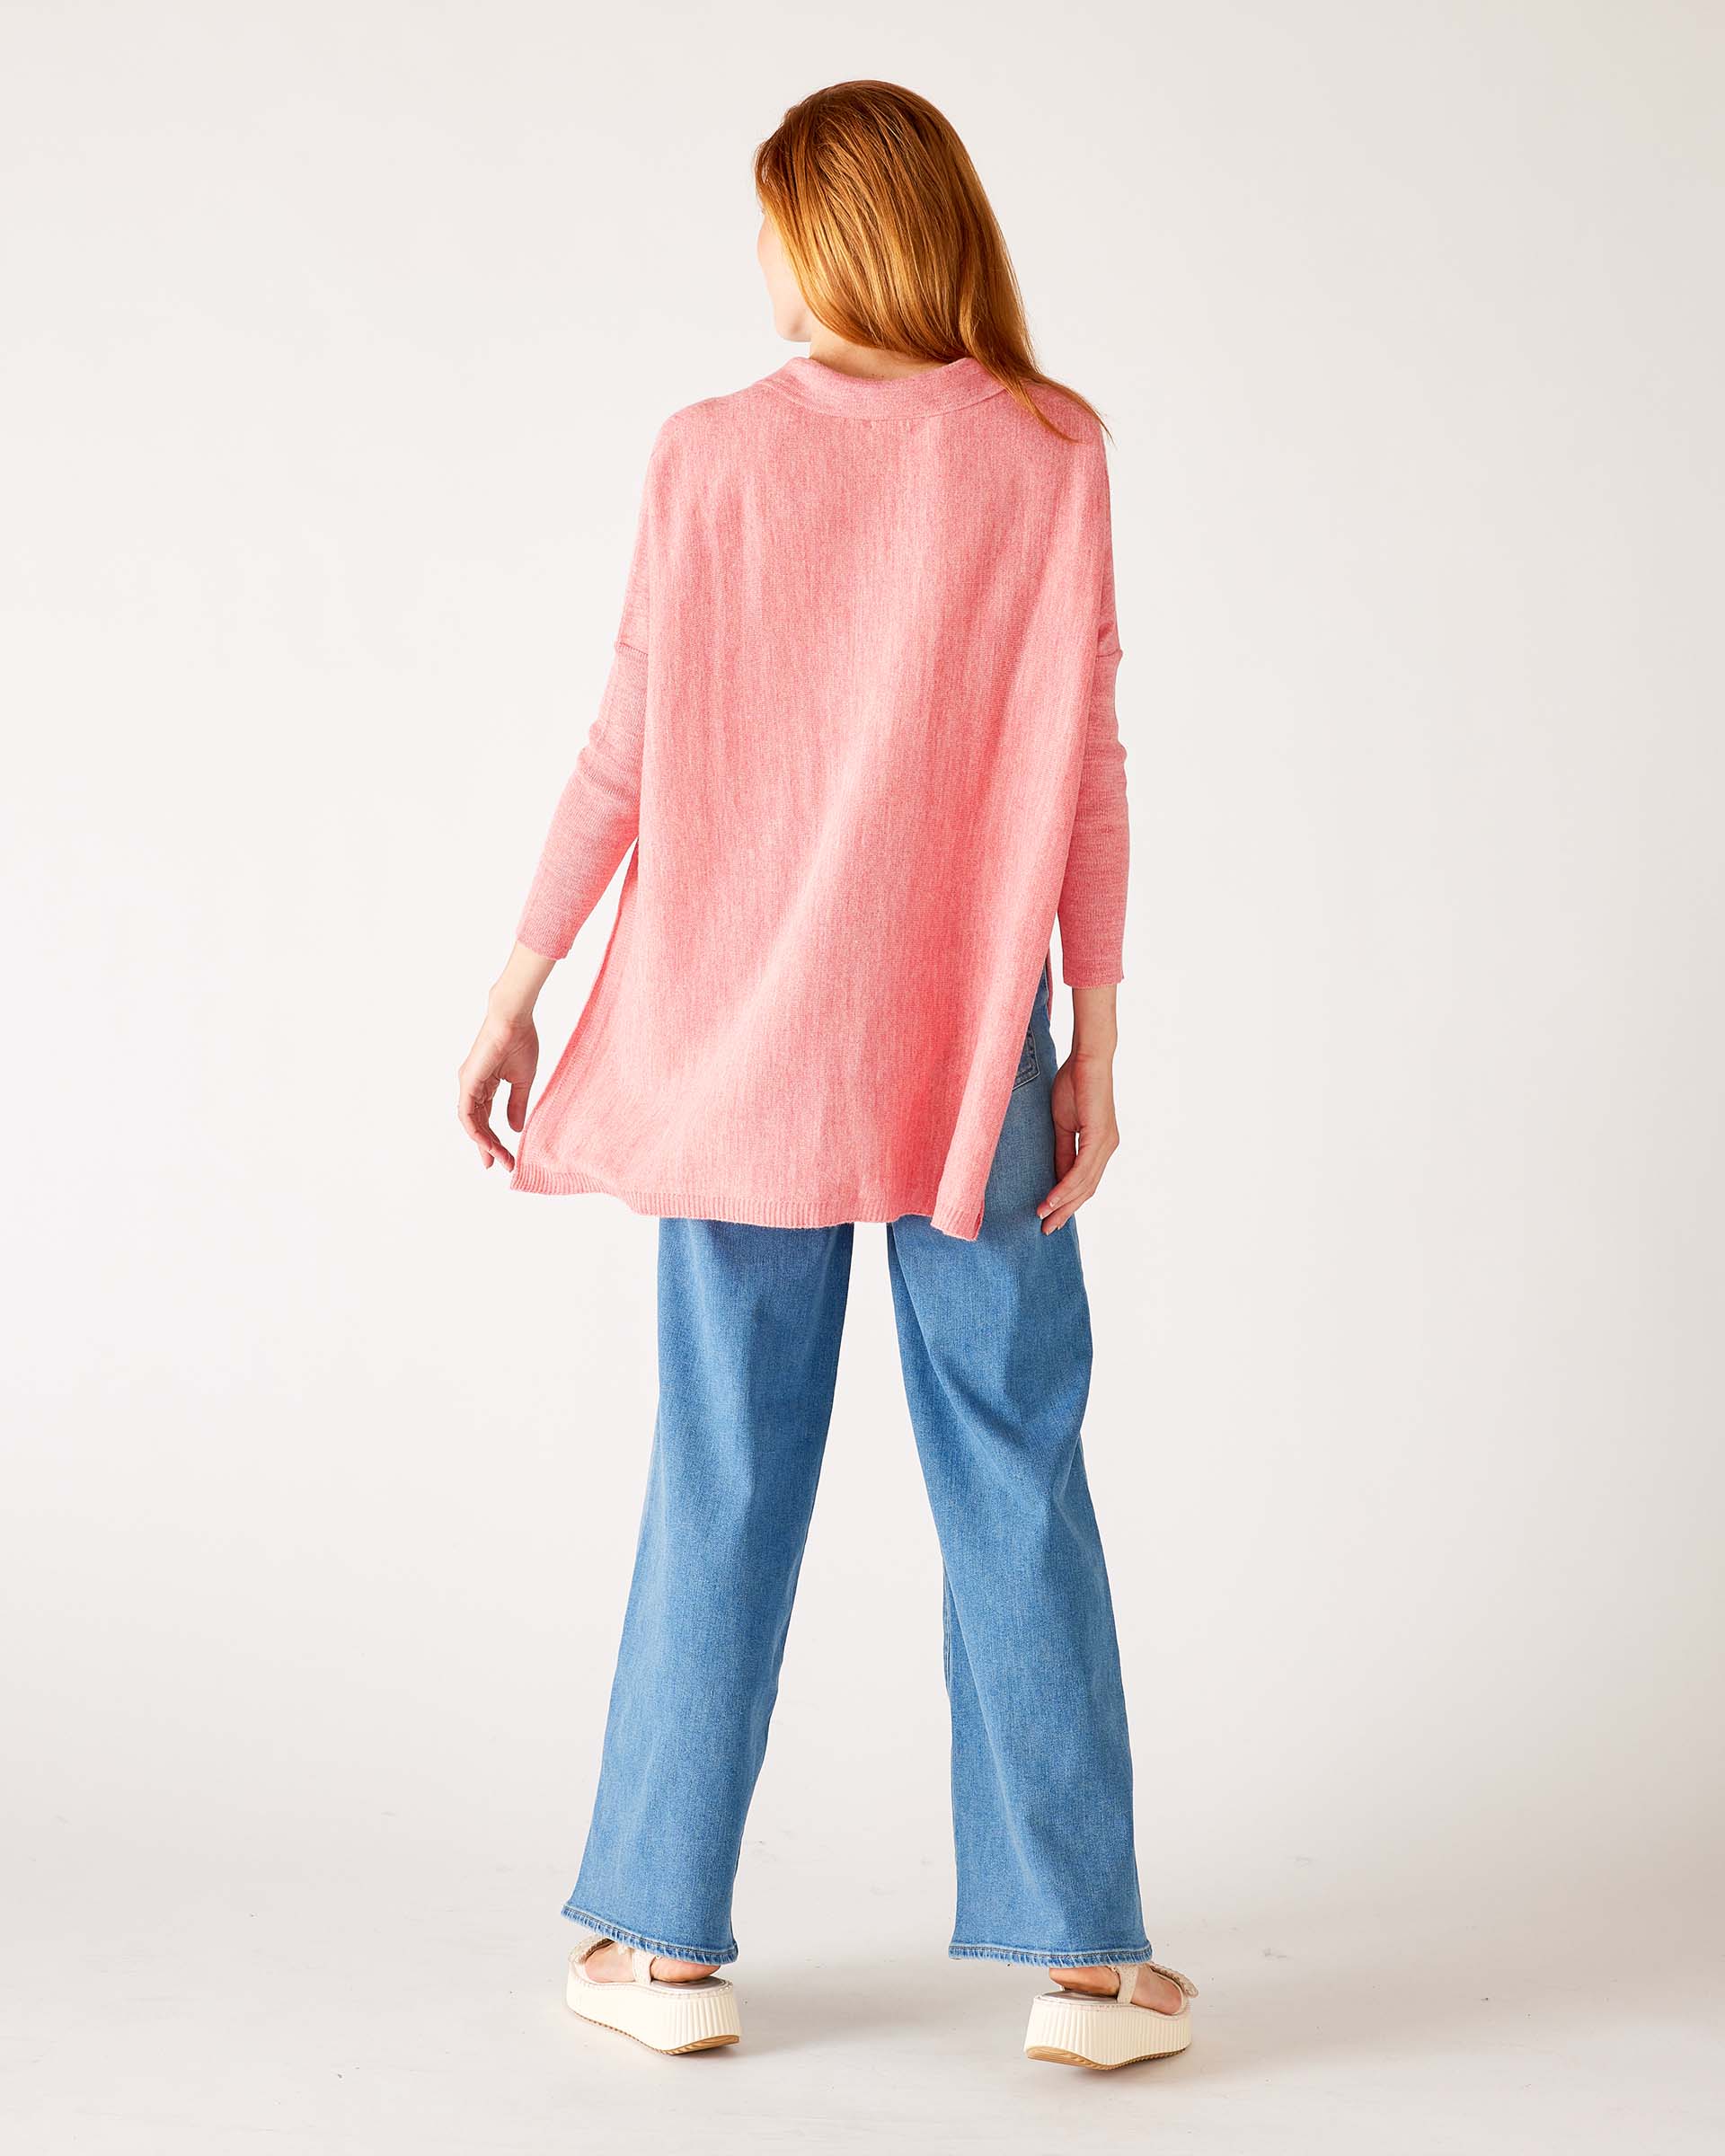 Women's Pink Heathered Collared V-neck- Polo Sweater Flowing Rear View